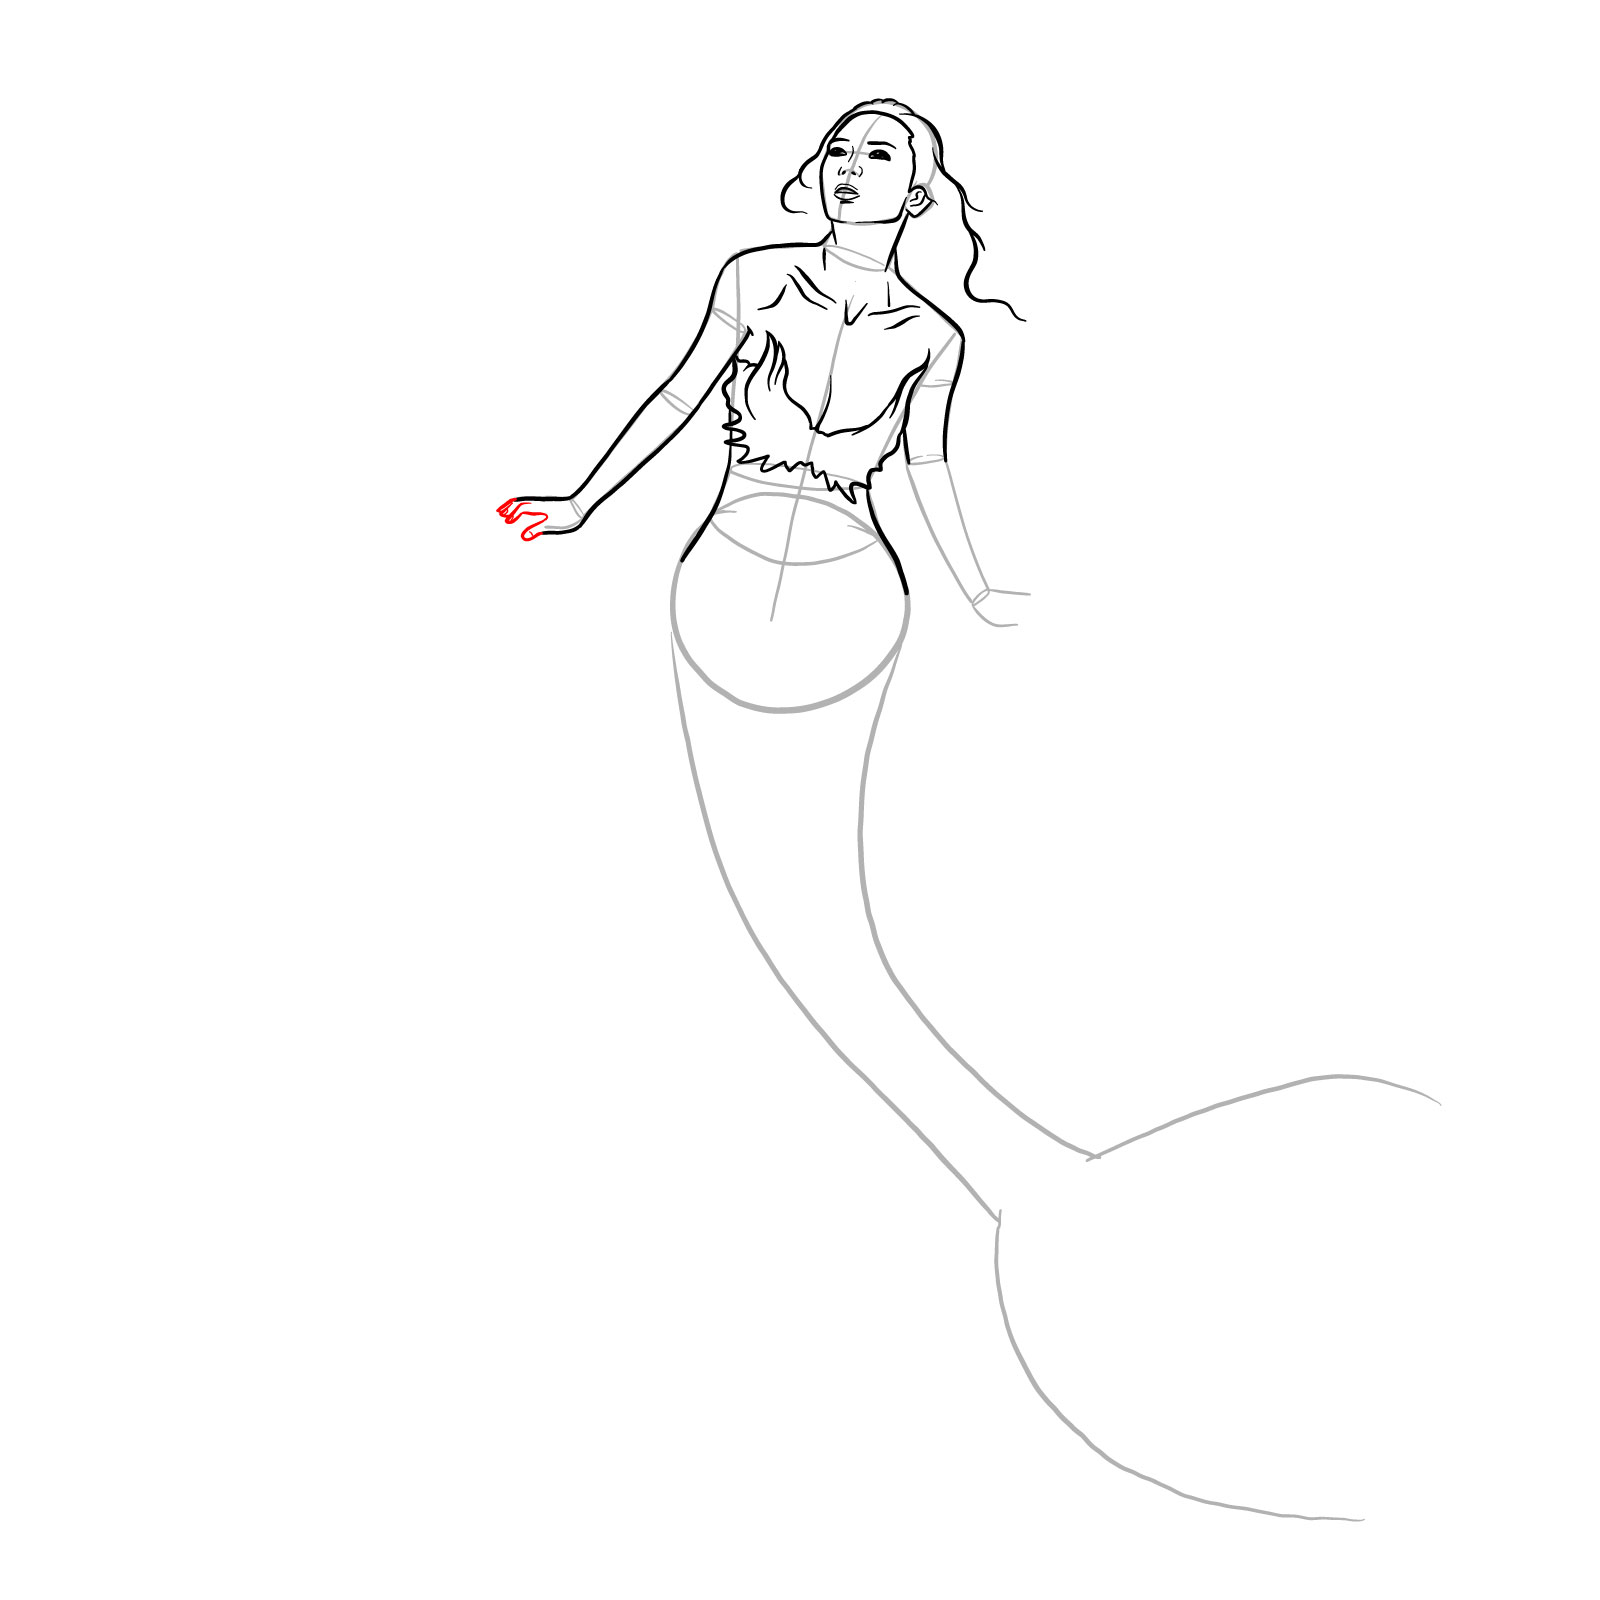 How to draw a Mermaid - step 16